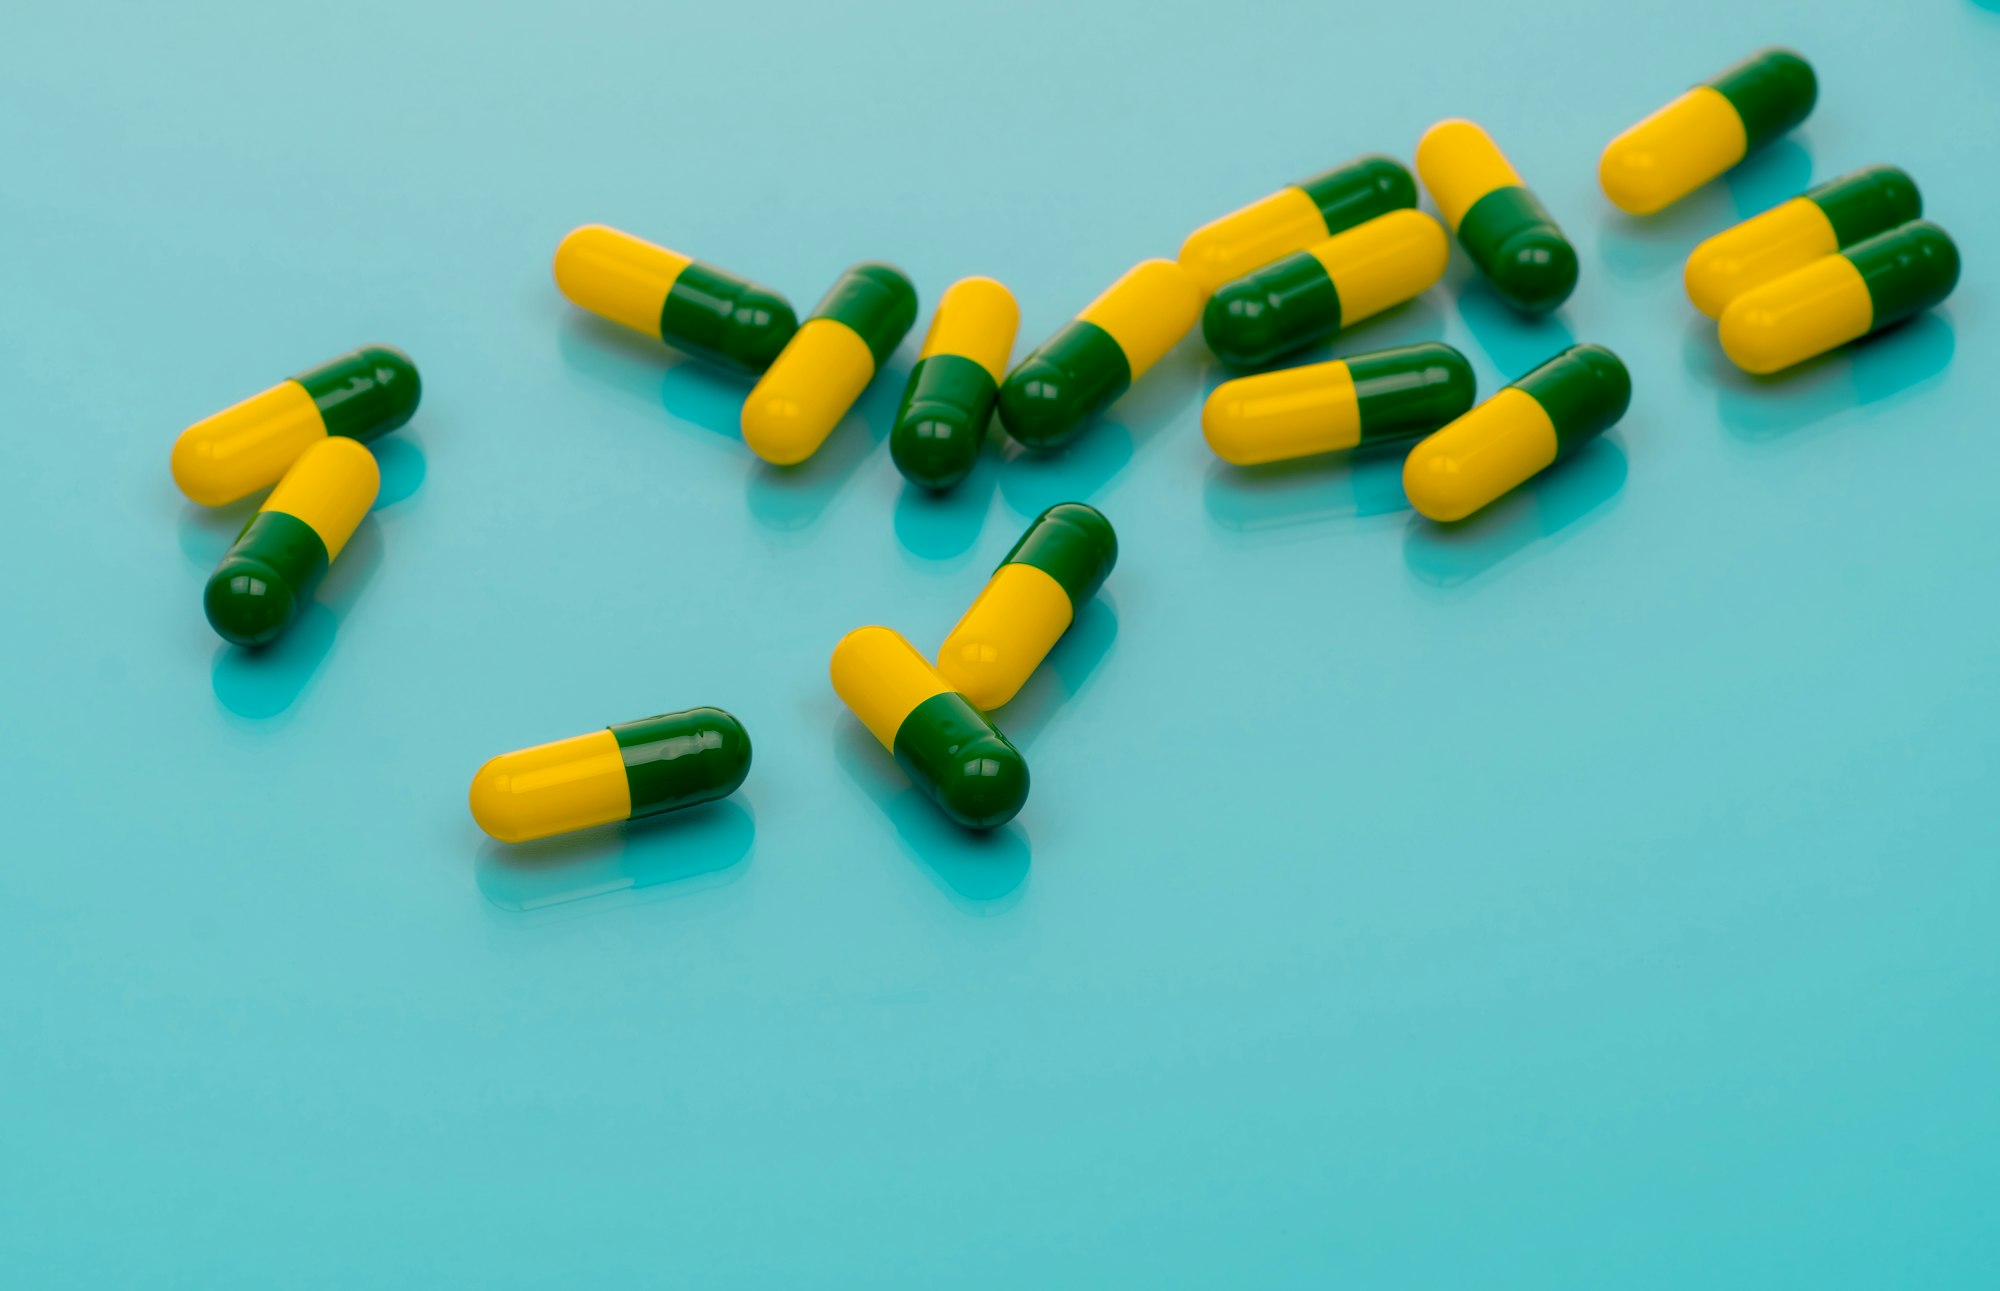 Green-yellow capsules spread on blue background. Tramadol capsule pills for relieve severe cancer